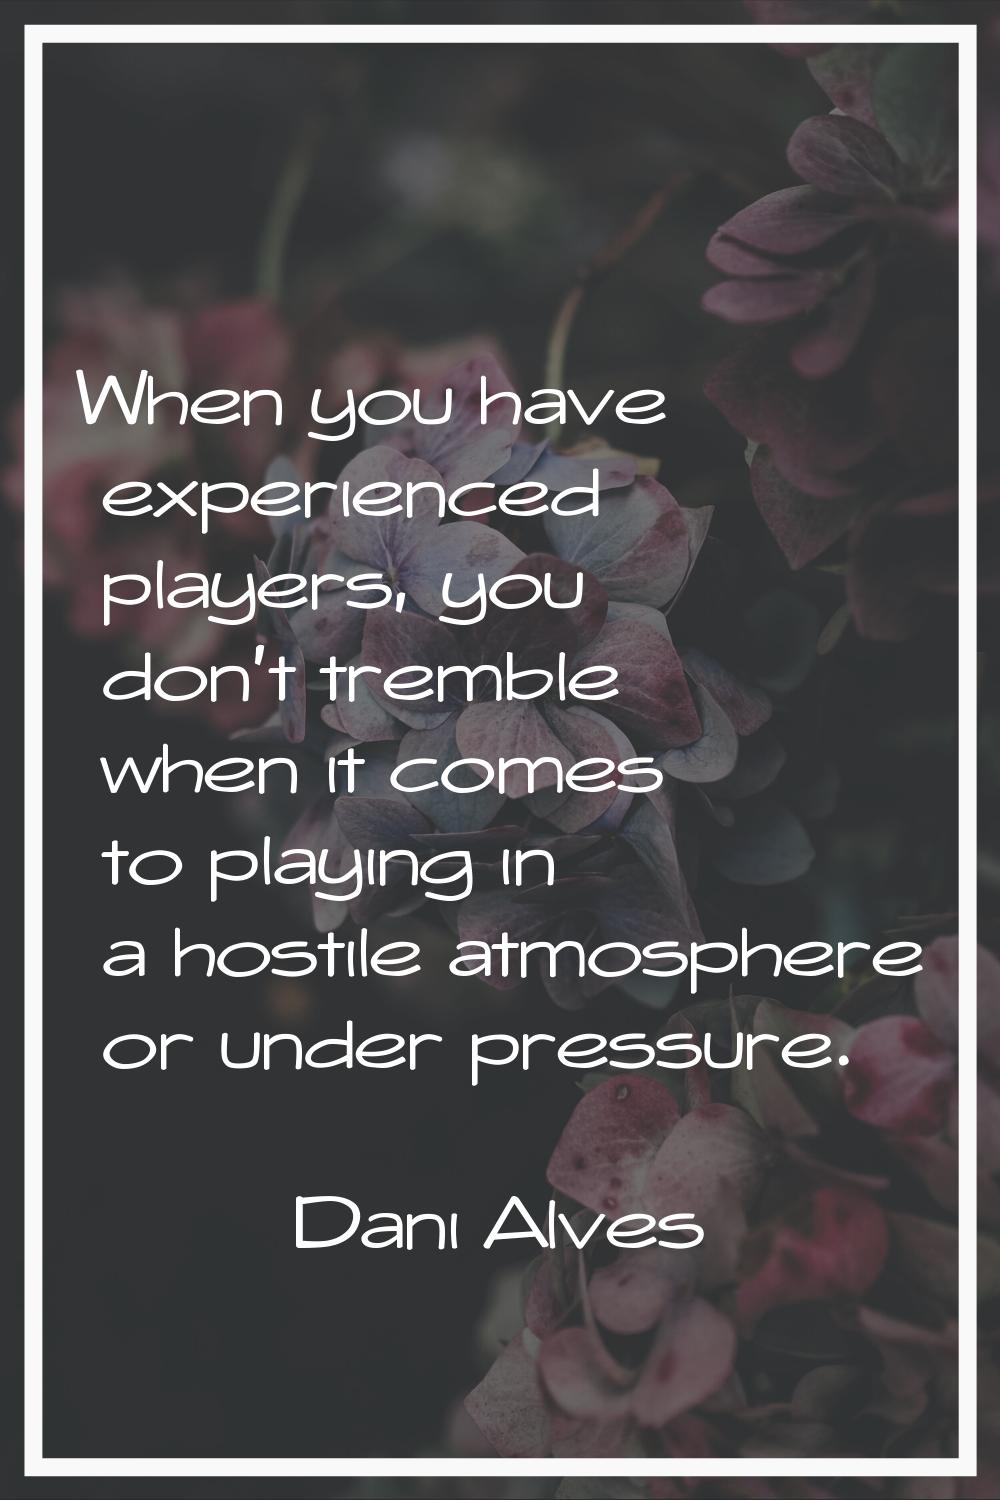 When you have experienced players, you don't tremble when it comes to playing in a hostile atmosphe